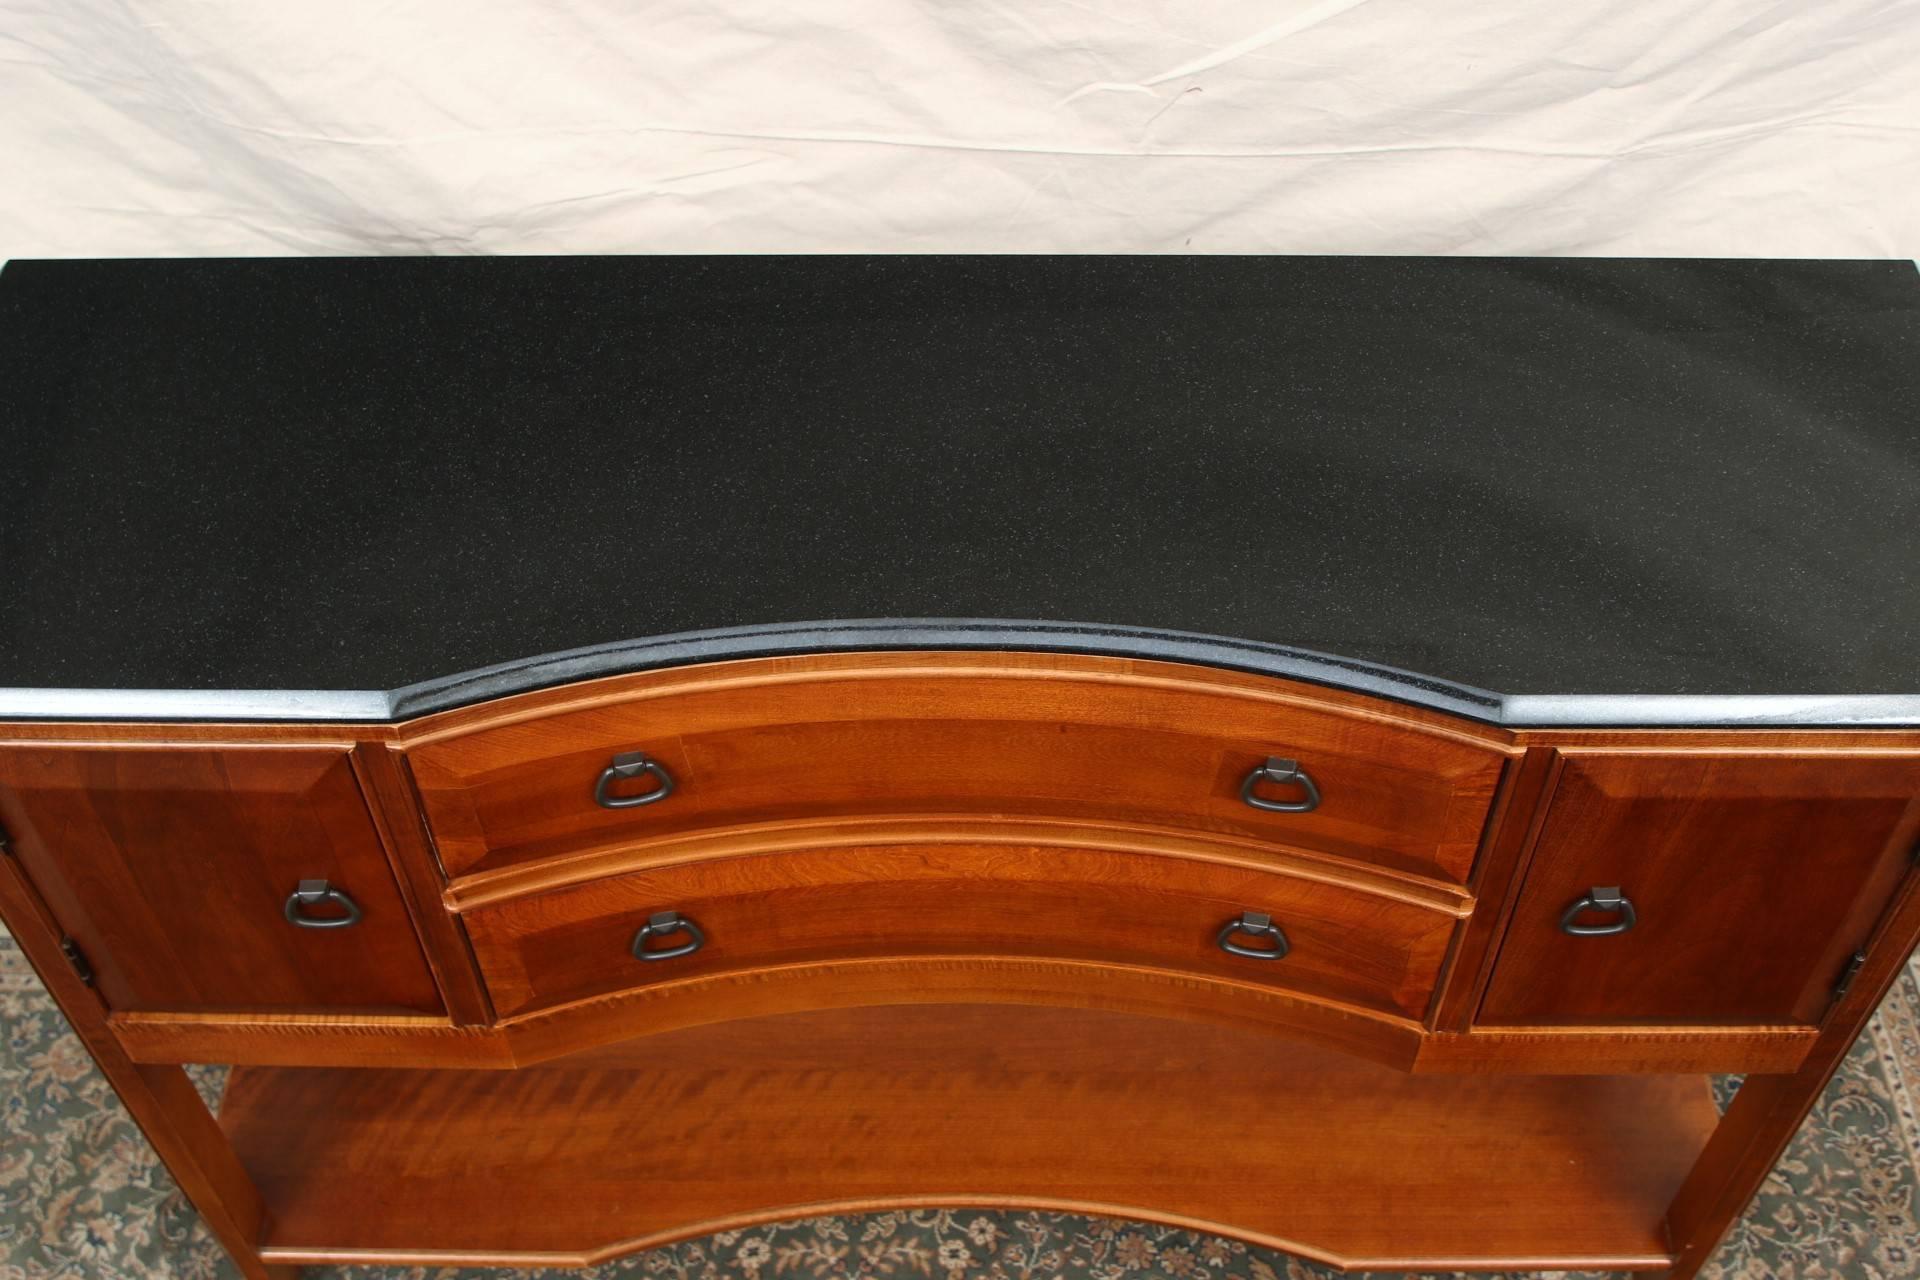 Mahogany with a shaped front and gray granite top with bullnose border. The cabinet with two side compartments flanking two long center drawers and a lower shaped shelf. Raised on front legs with canted corners and square back legs. Very well made,